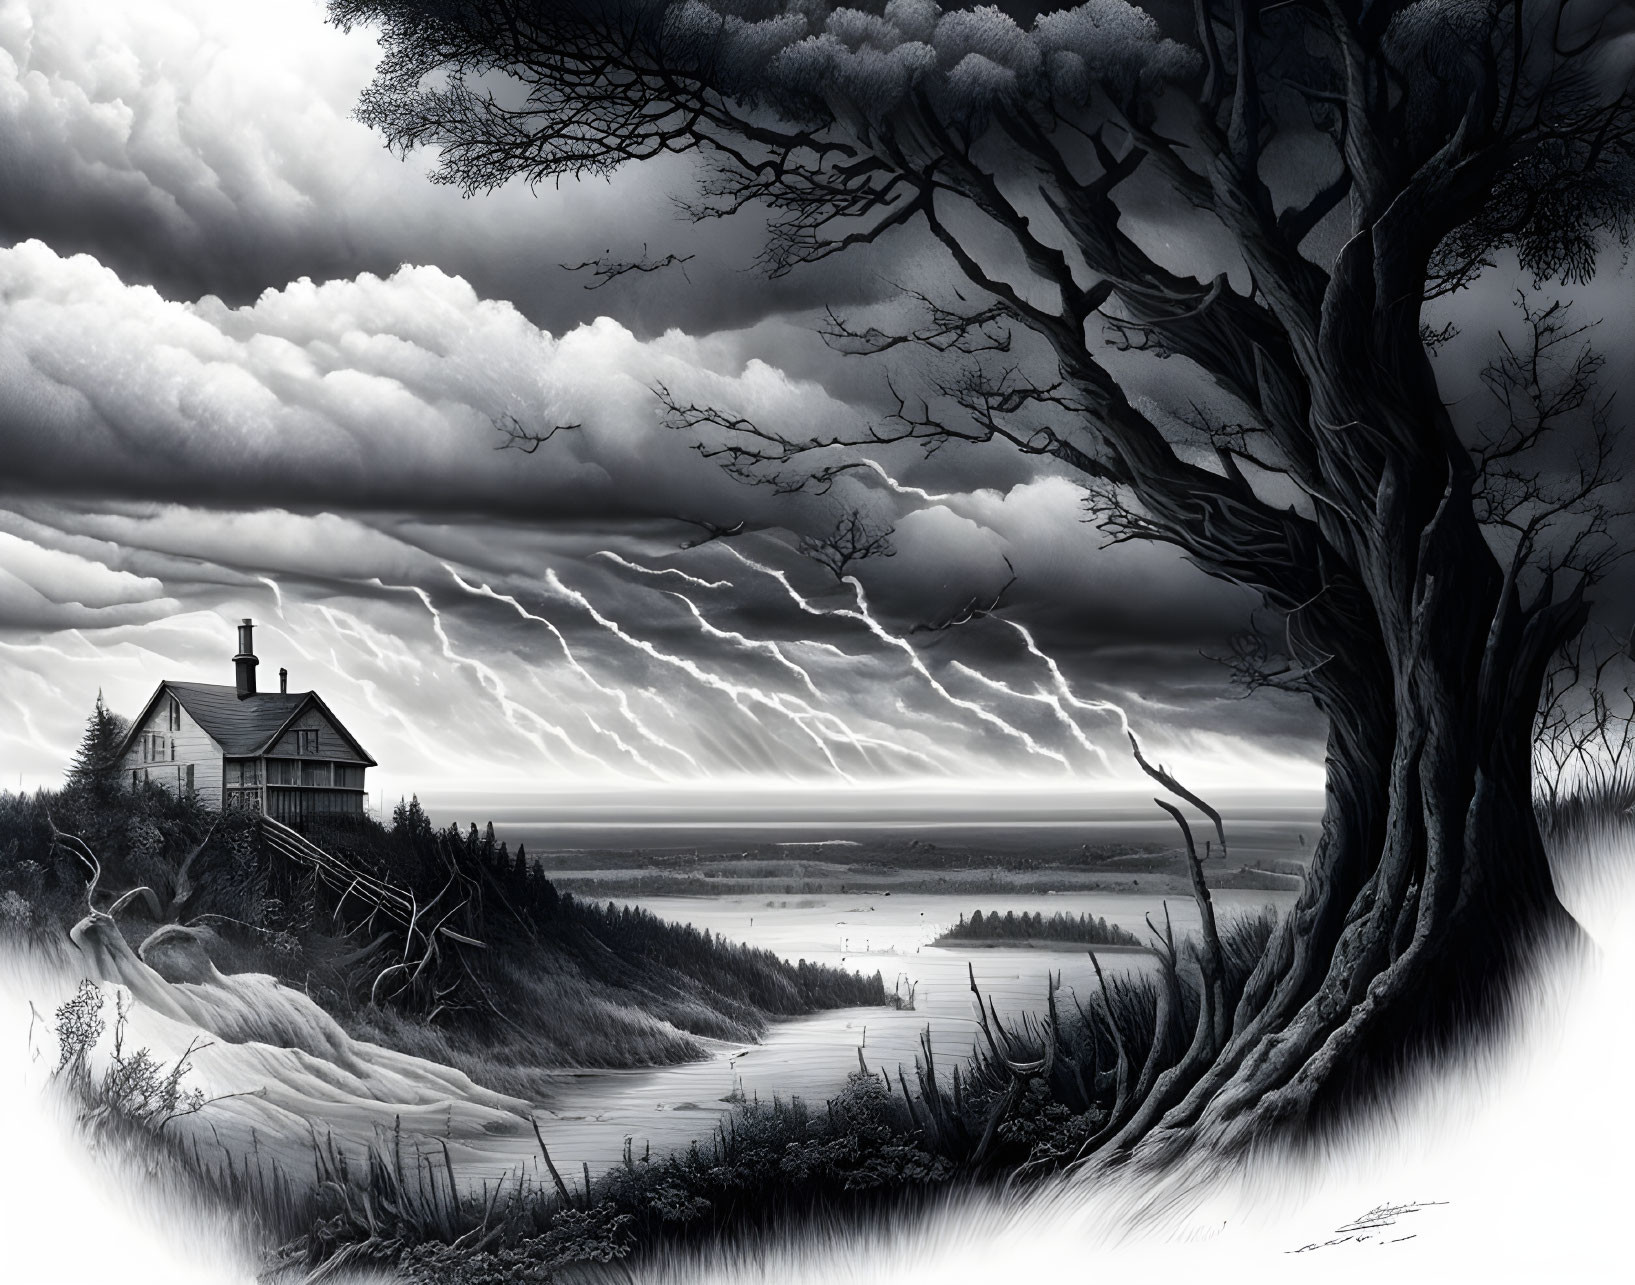 Monochromatic landscape with tree, house, stormy sky, lightning, water, boats